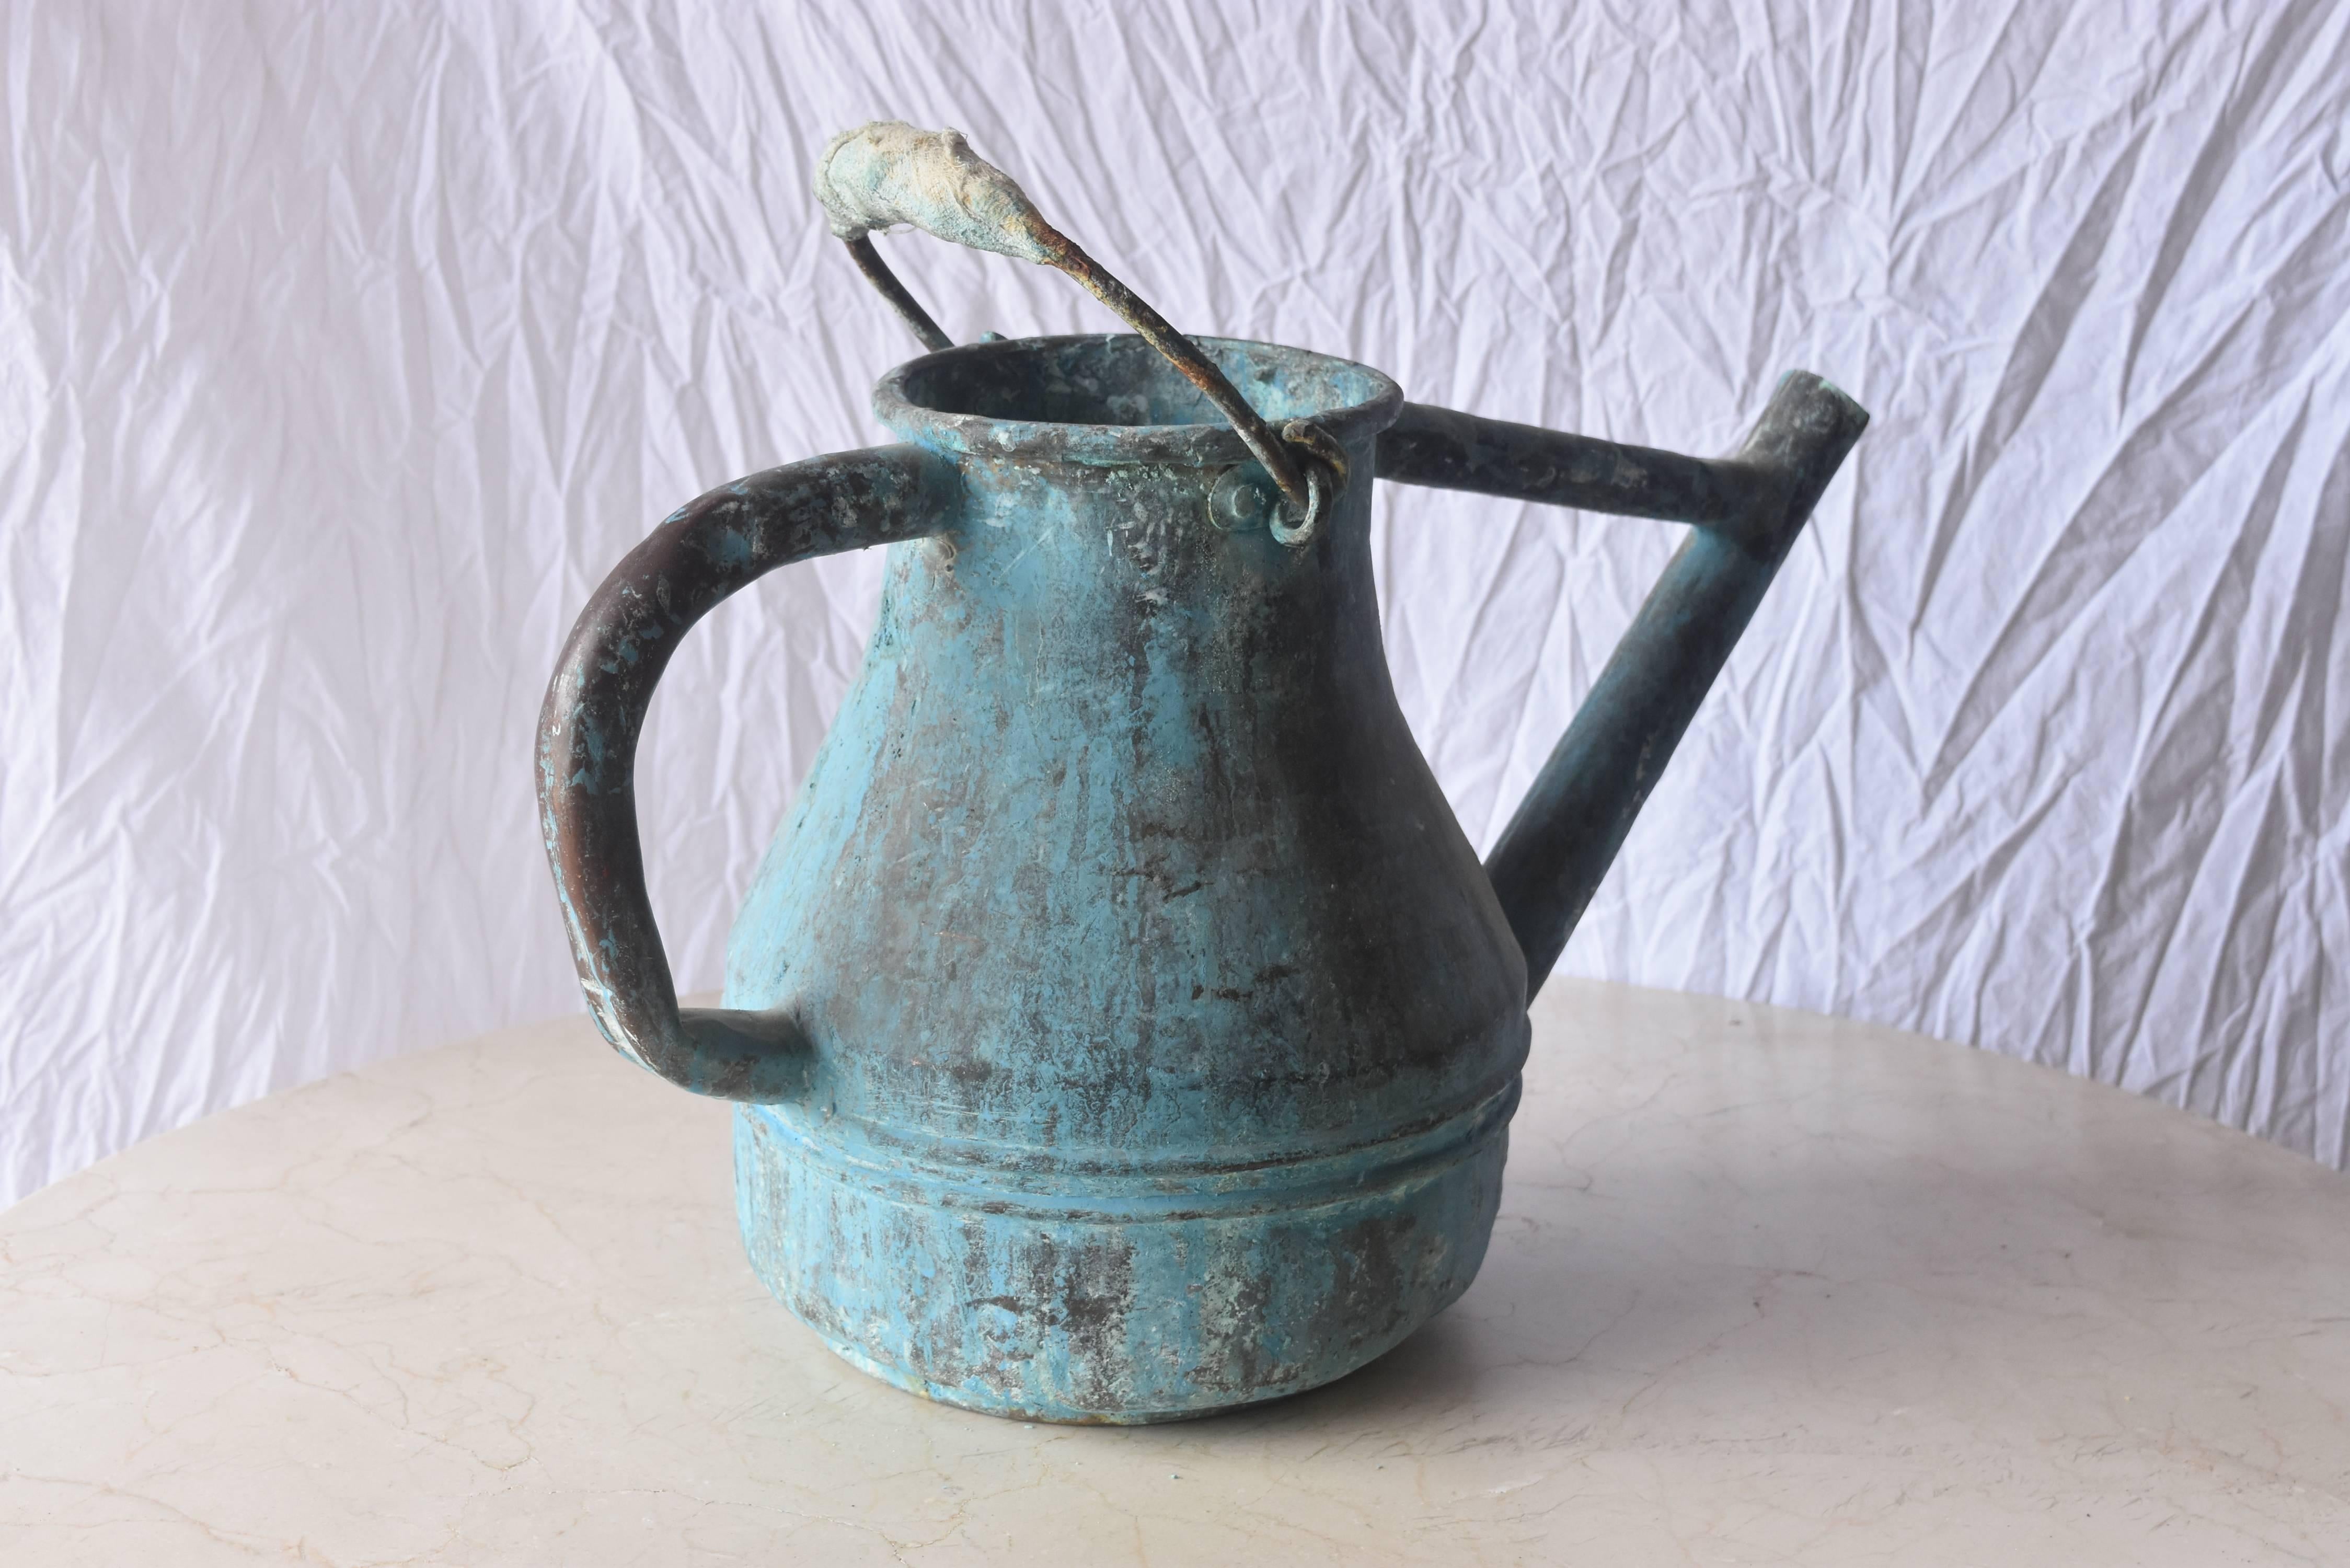 This is not your run of the mill watering can. It's unique, large-scale, copper one from France. It is totally intact, heavy duty and useable today. The patina is especially desirable and makes a colorful, decorative garden piece as well.